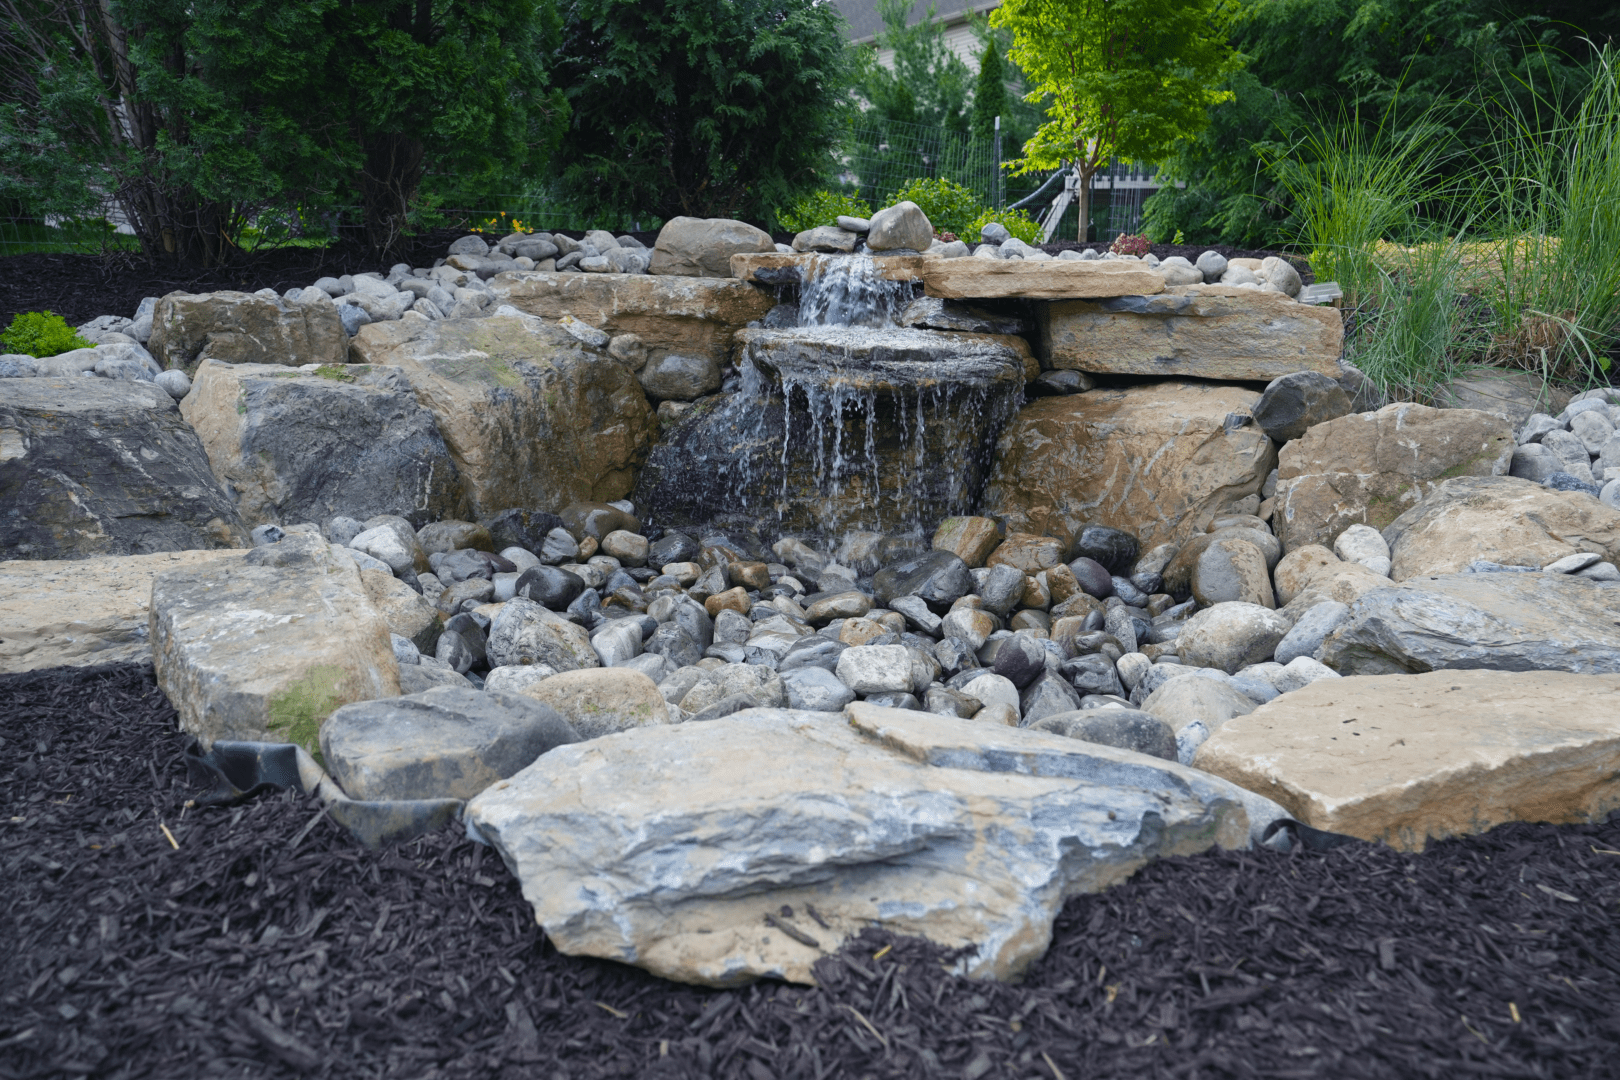 A water feature in a backyard with rocks and gravel.